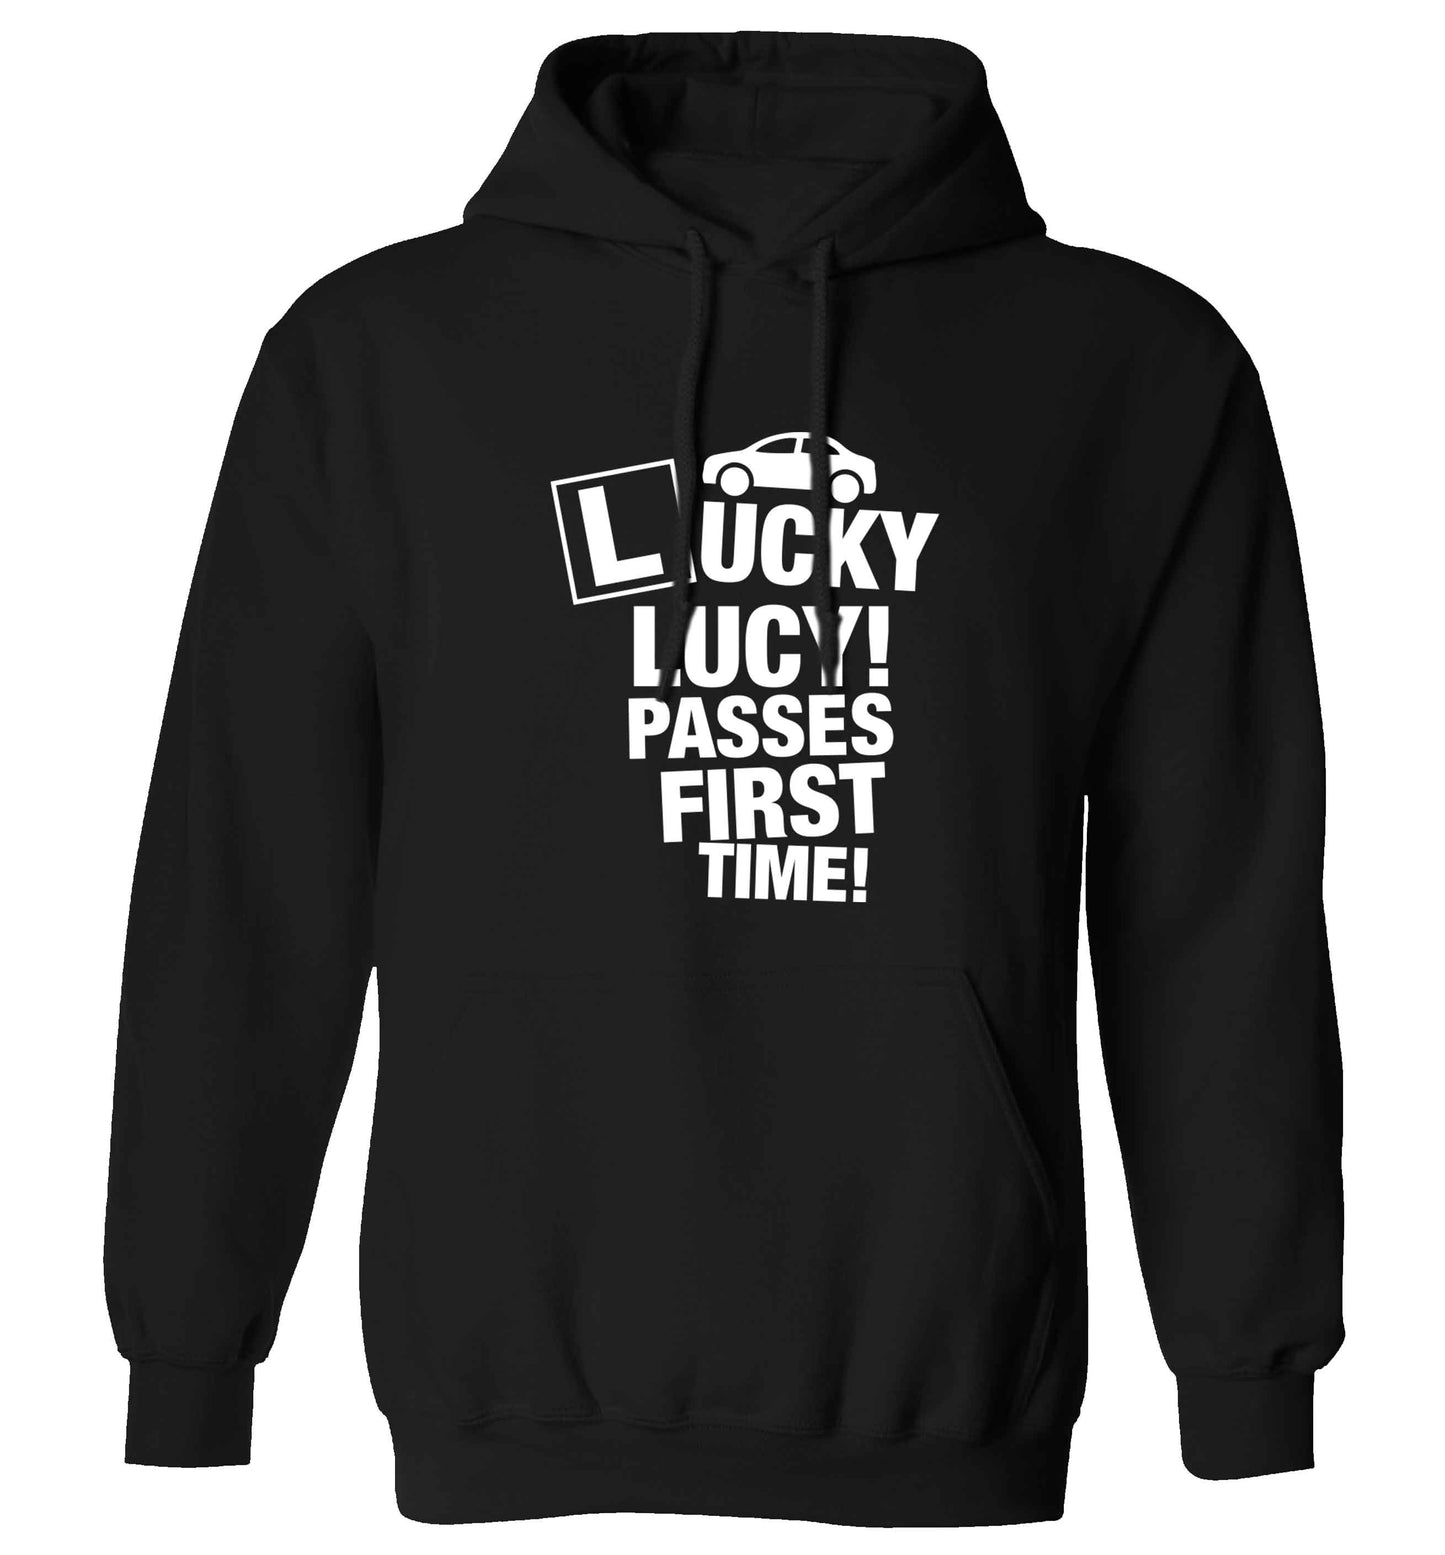 Personalised Lucky passes first time adults unisex black hoodie 2XL